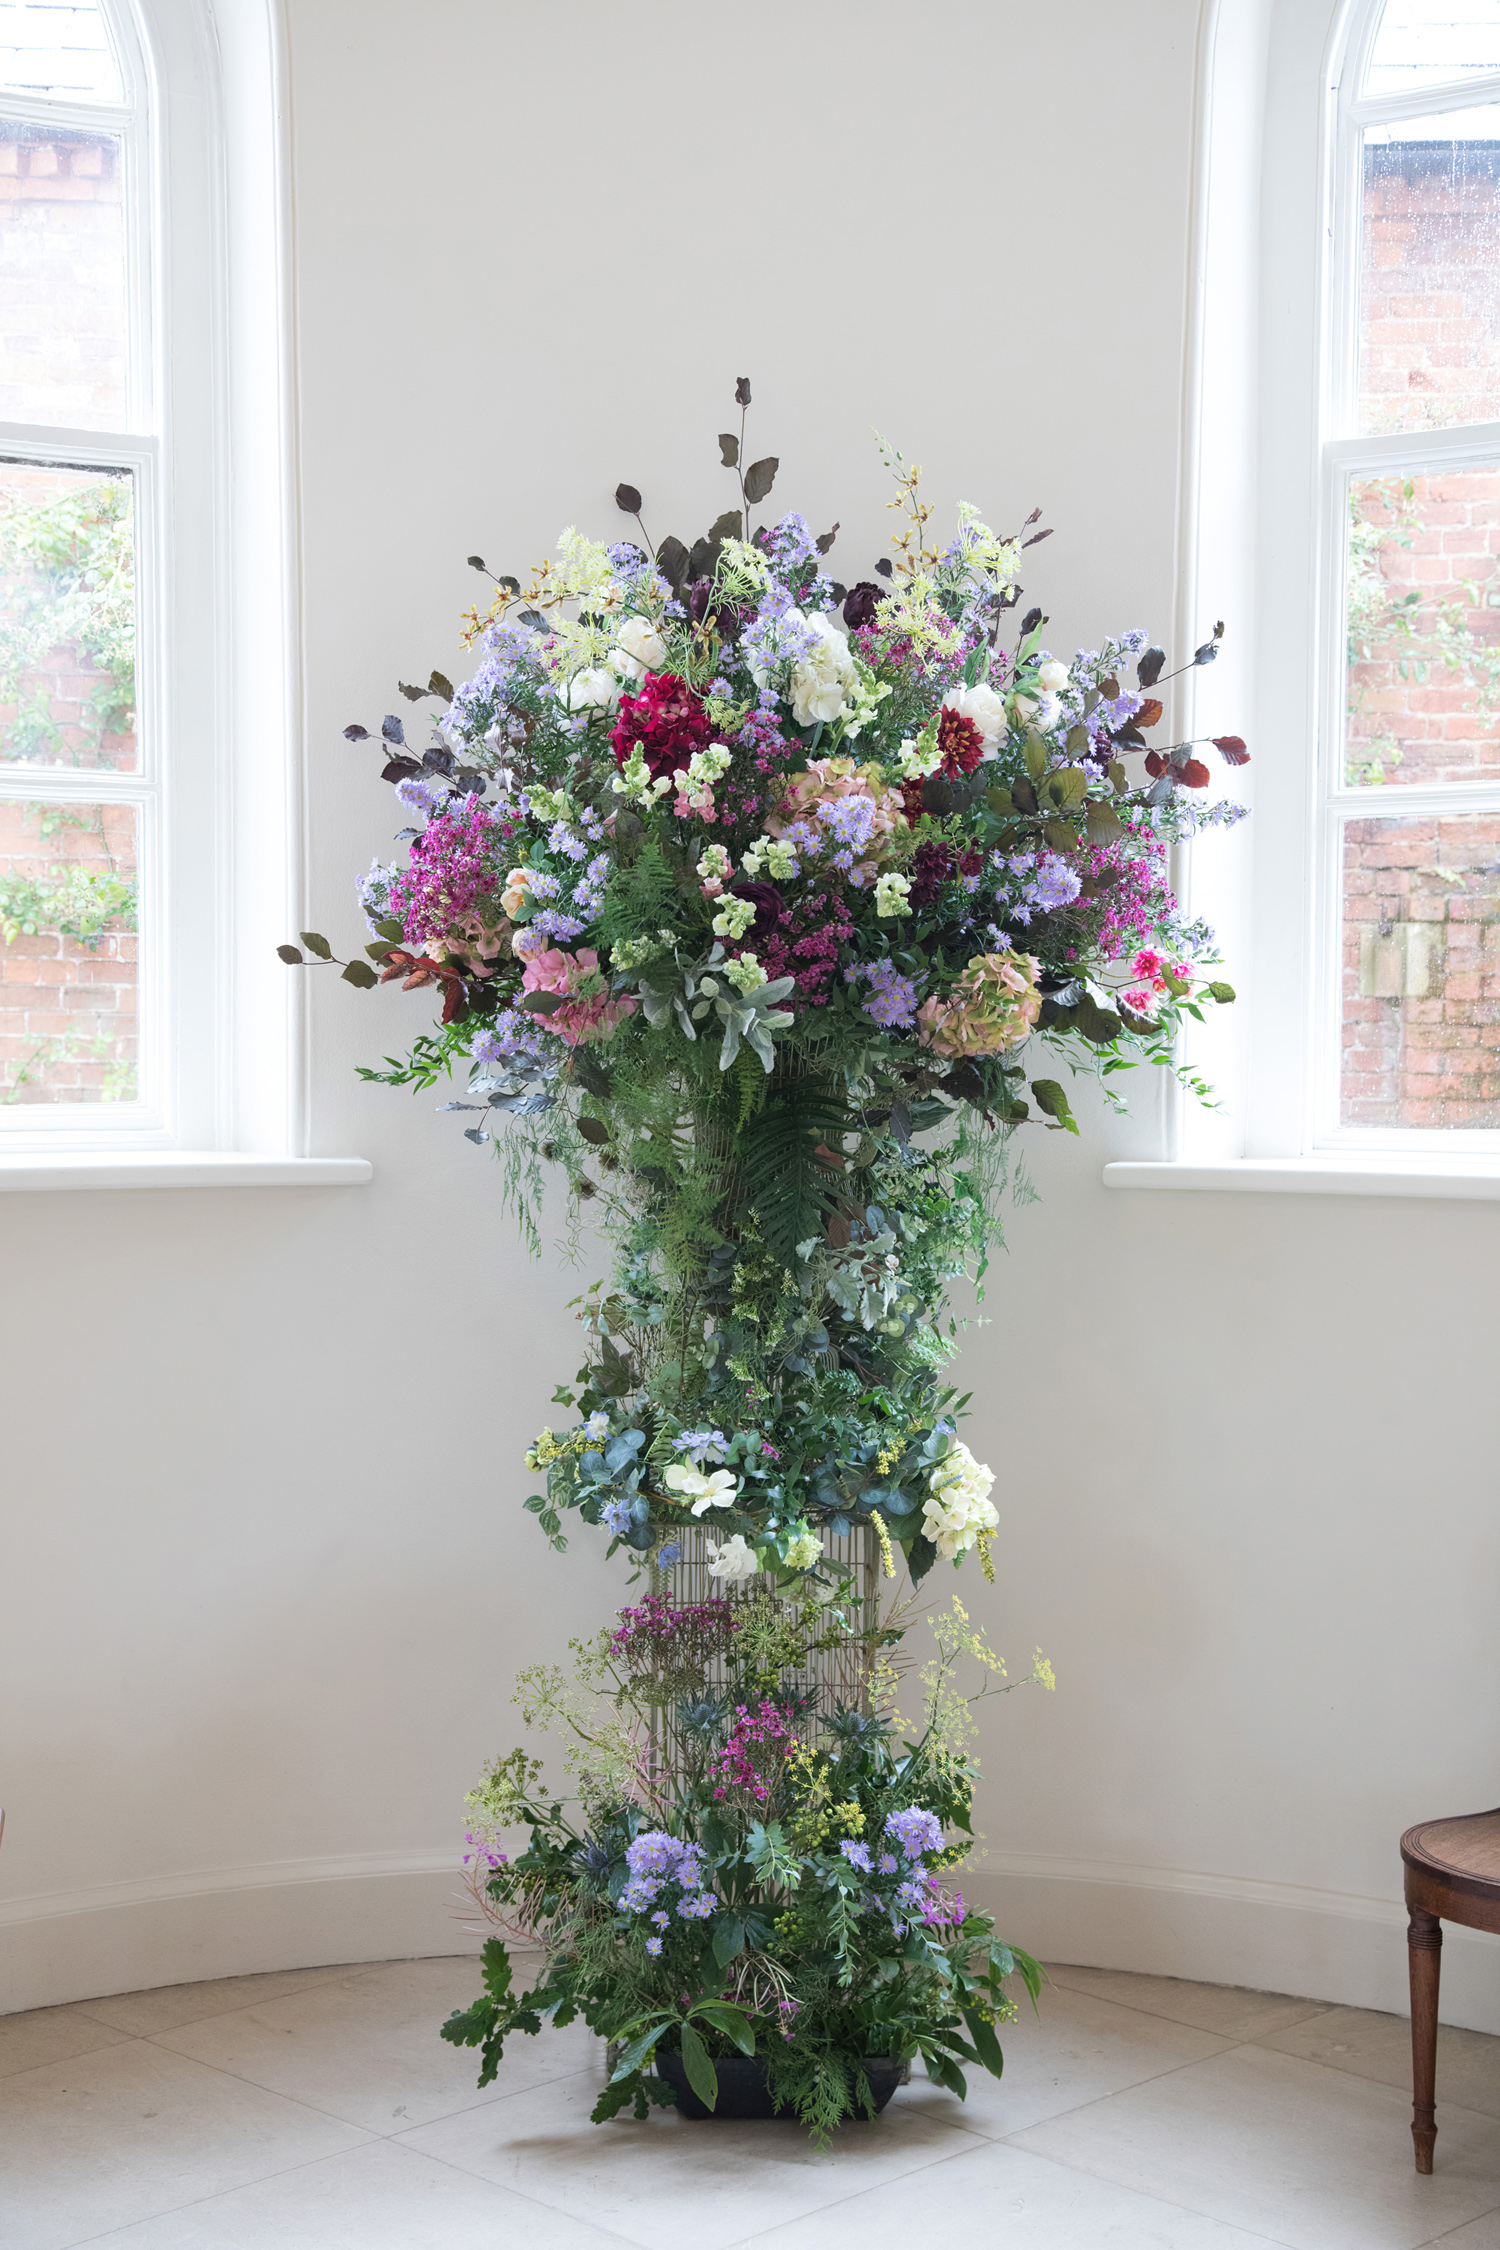 A focused image on a large floor standing floral arrangement for a wedding using blue, white, lilacs and deep red colour schemes and lots of green foliage